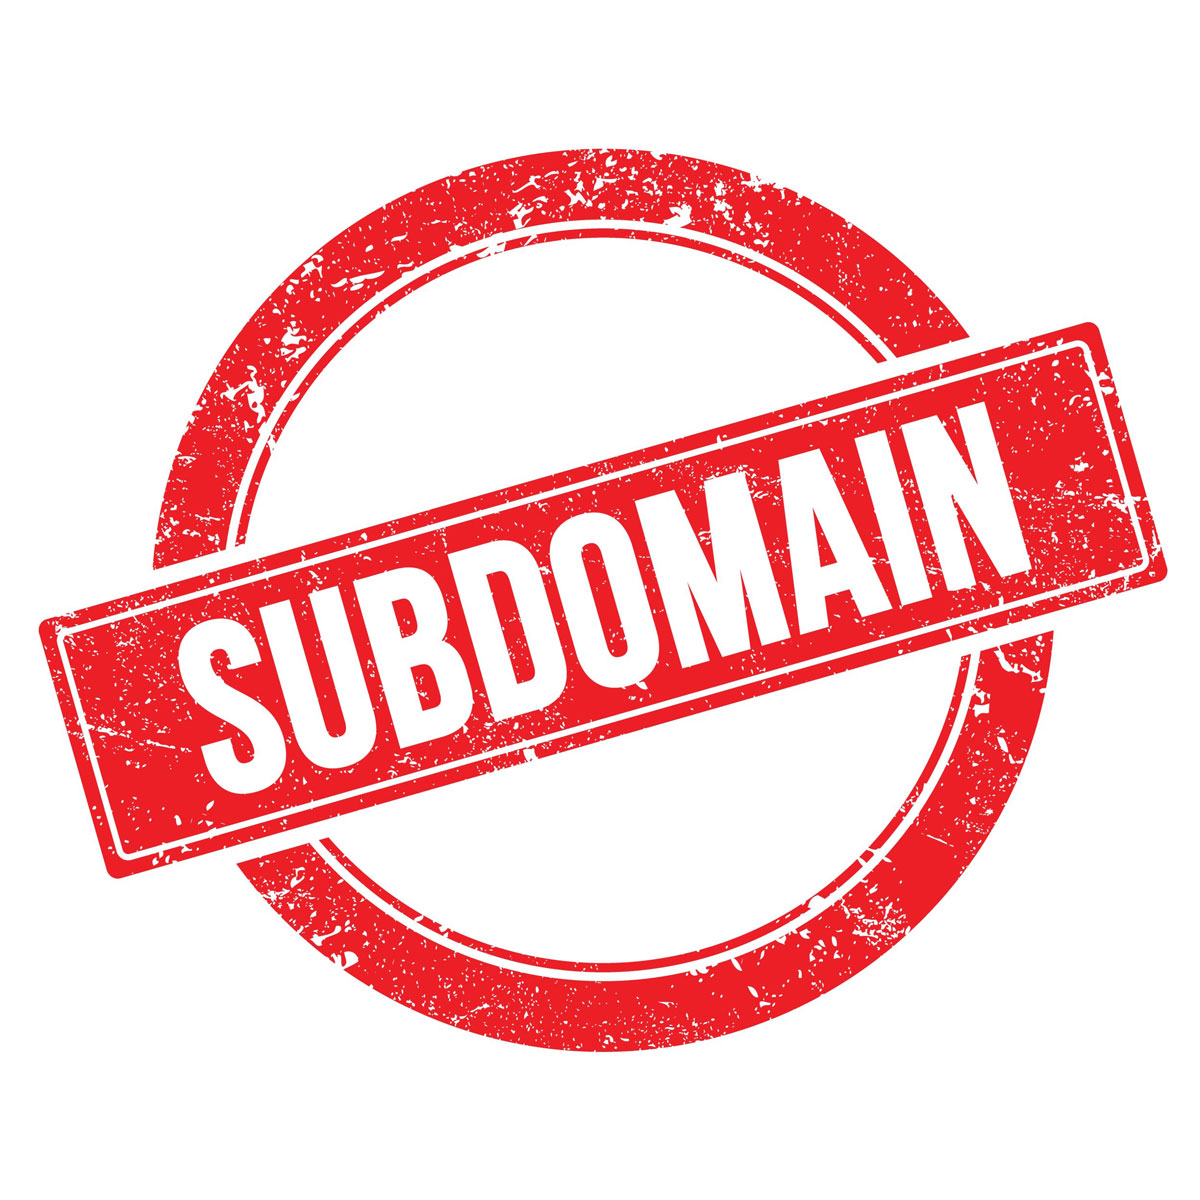 Big red stamp saying Subdomain in the middle